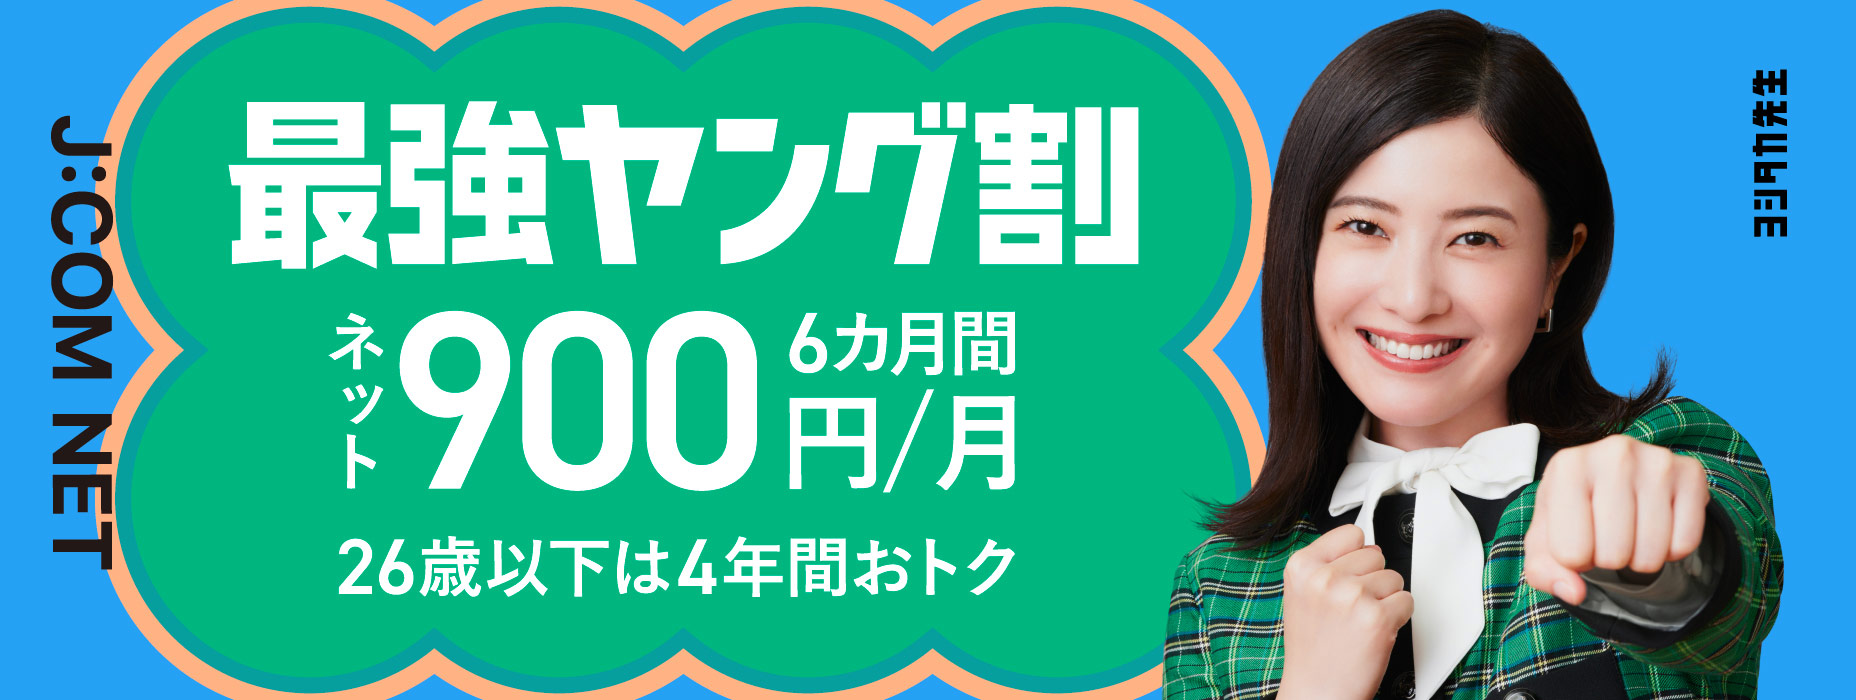 If you are under 26 years old, internet costs start from 900 yen per month! J:COM NET Saikyo Young Wari